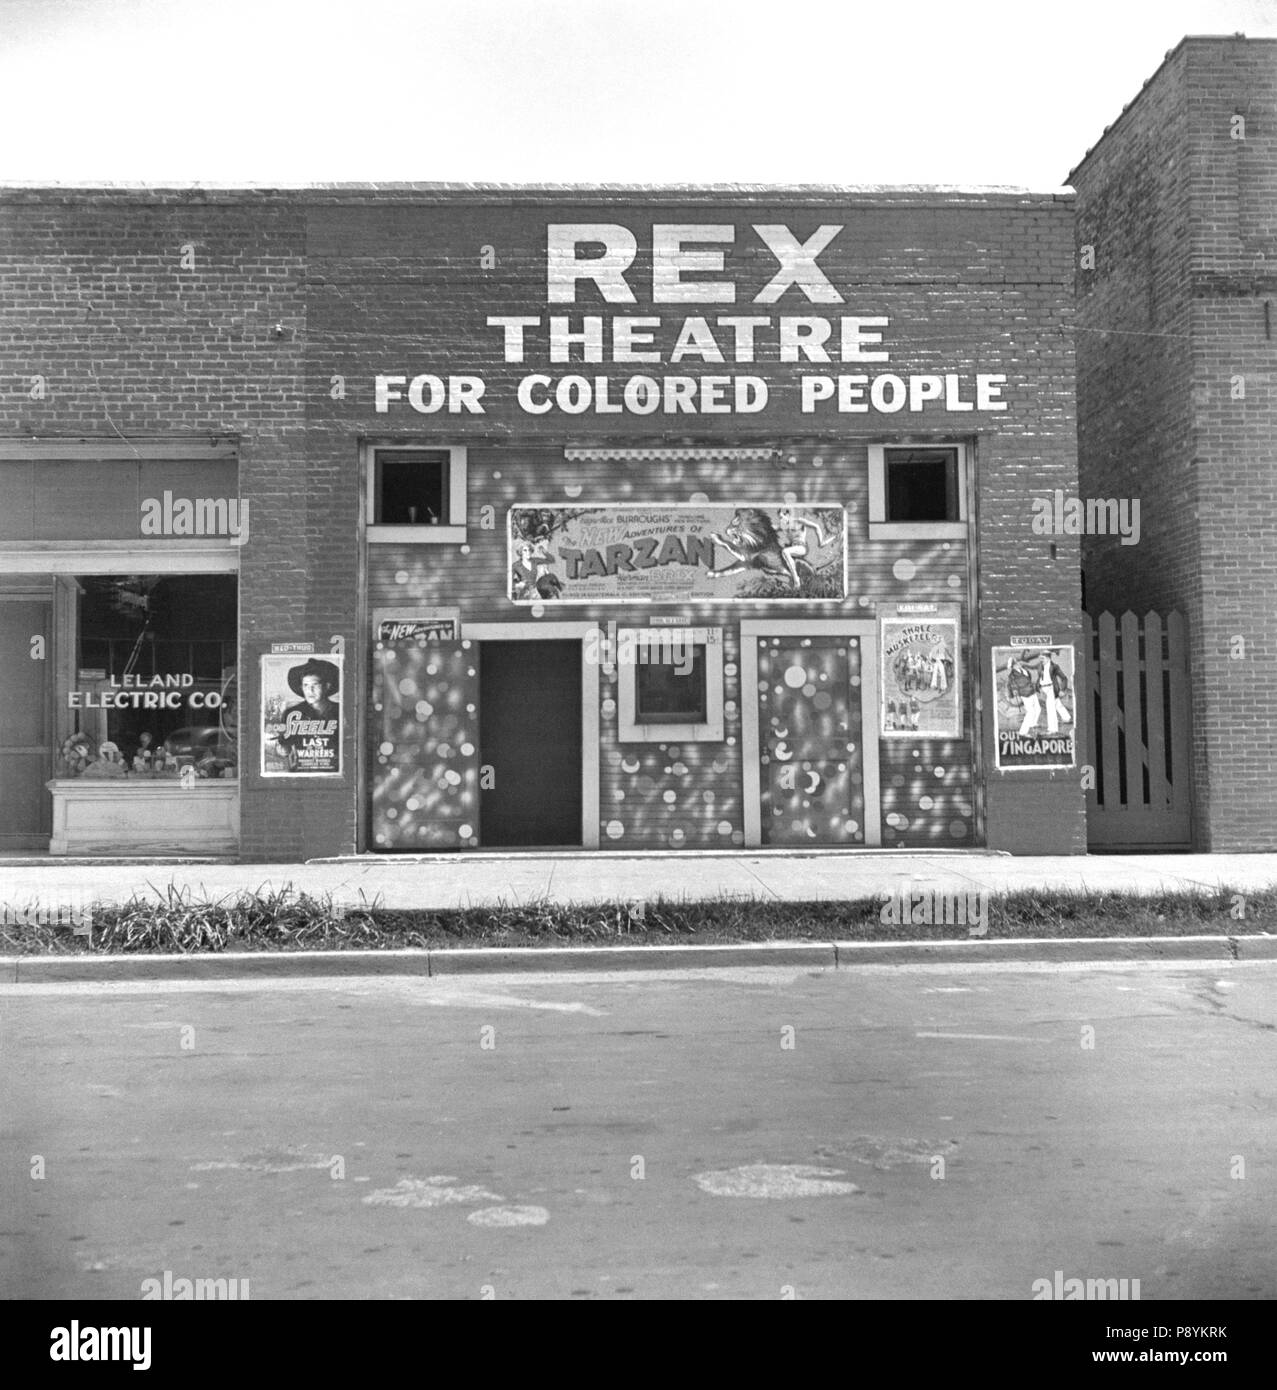 Theater with Sign 'Rex Theater for Colored People', Leland, Mississippi, USA, Dorothea Lange, Farm Security Administration, June1937 Stock Photo